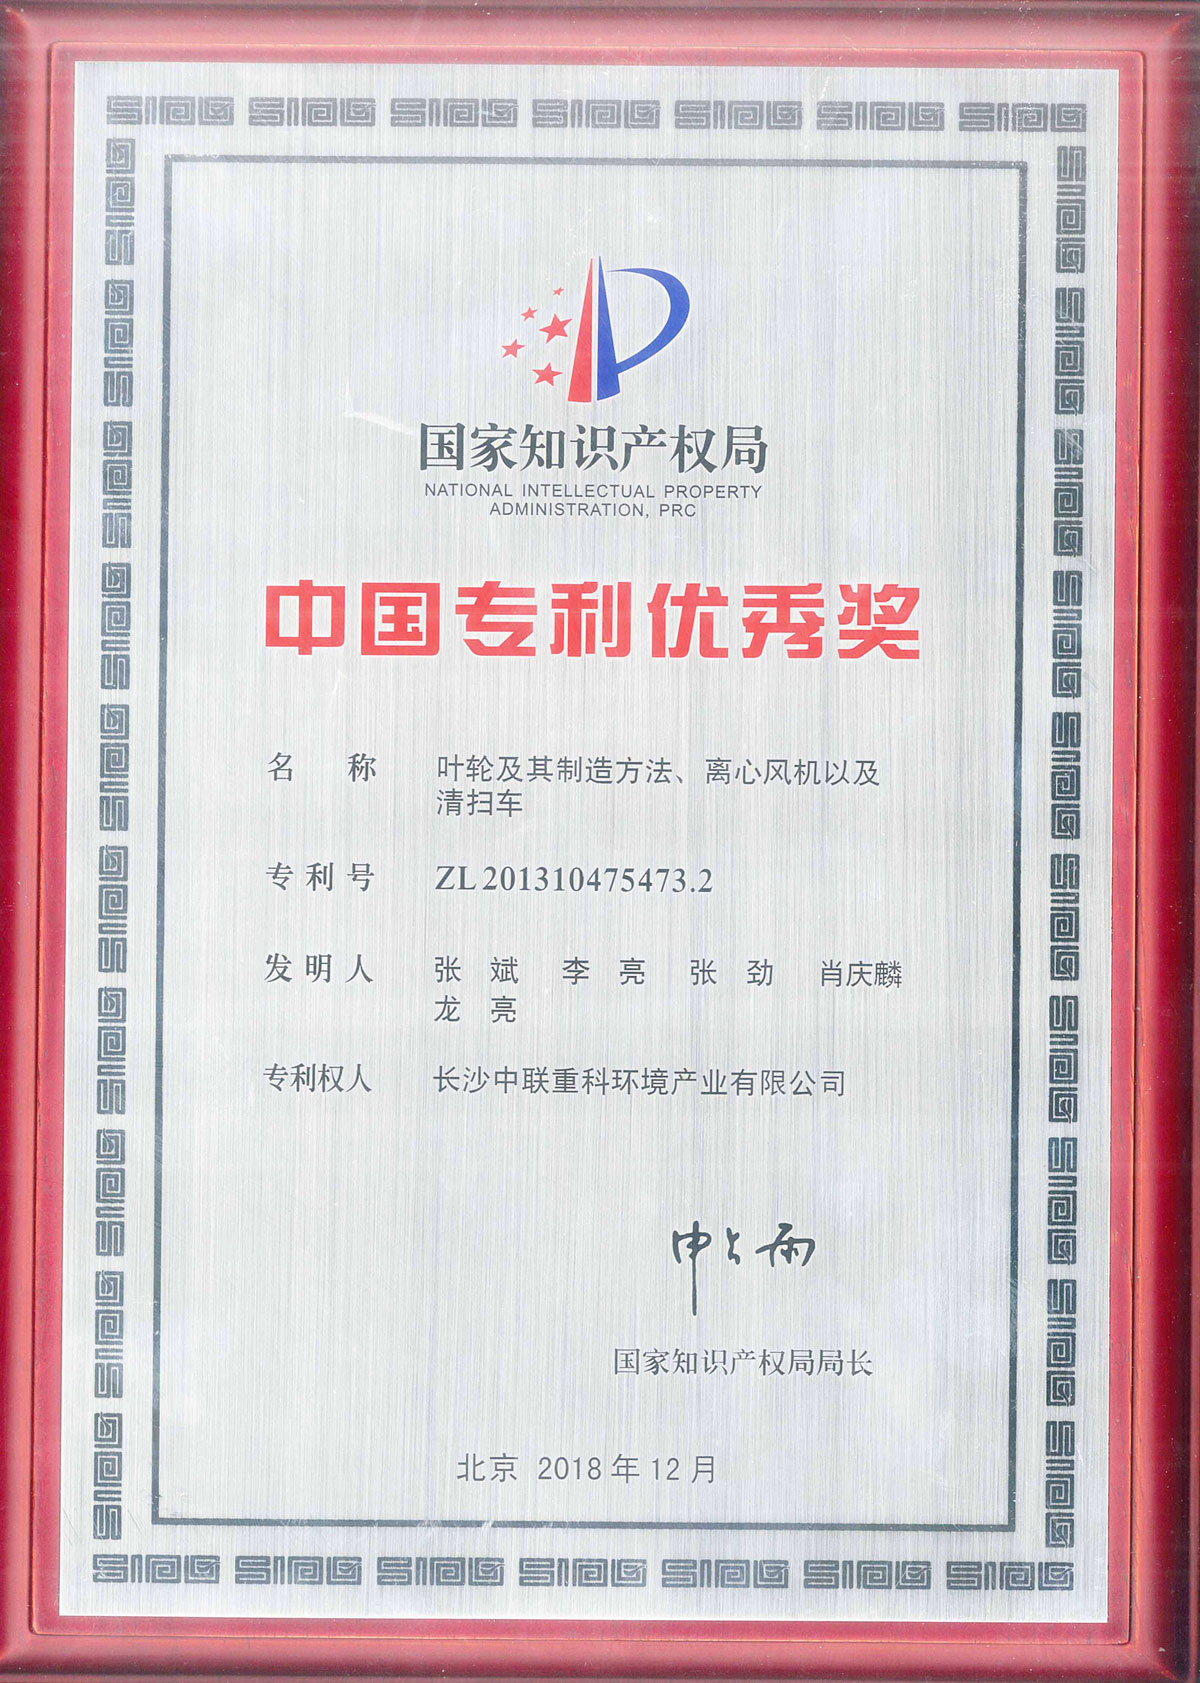 China Patent Award of Excellence